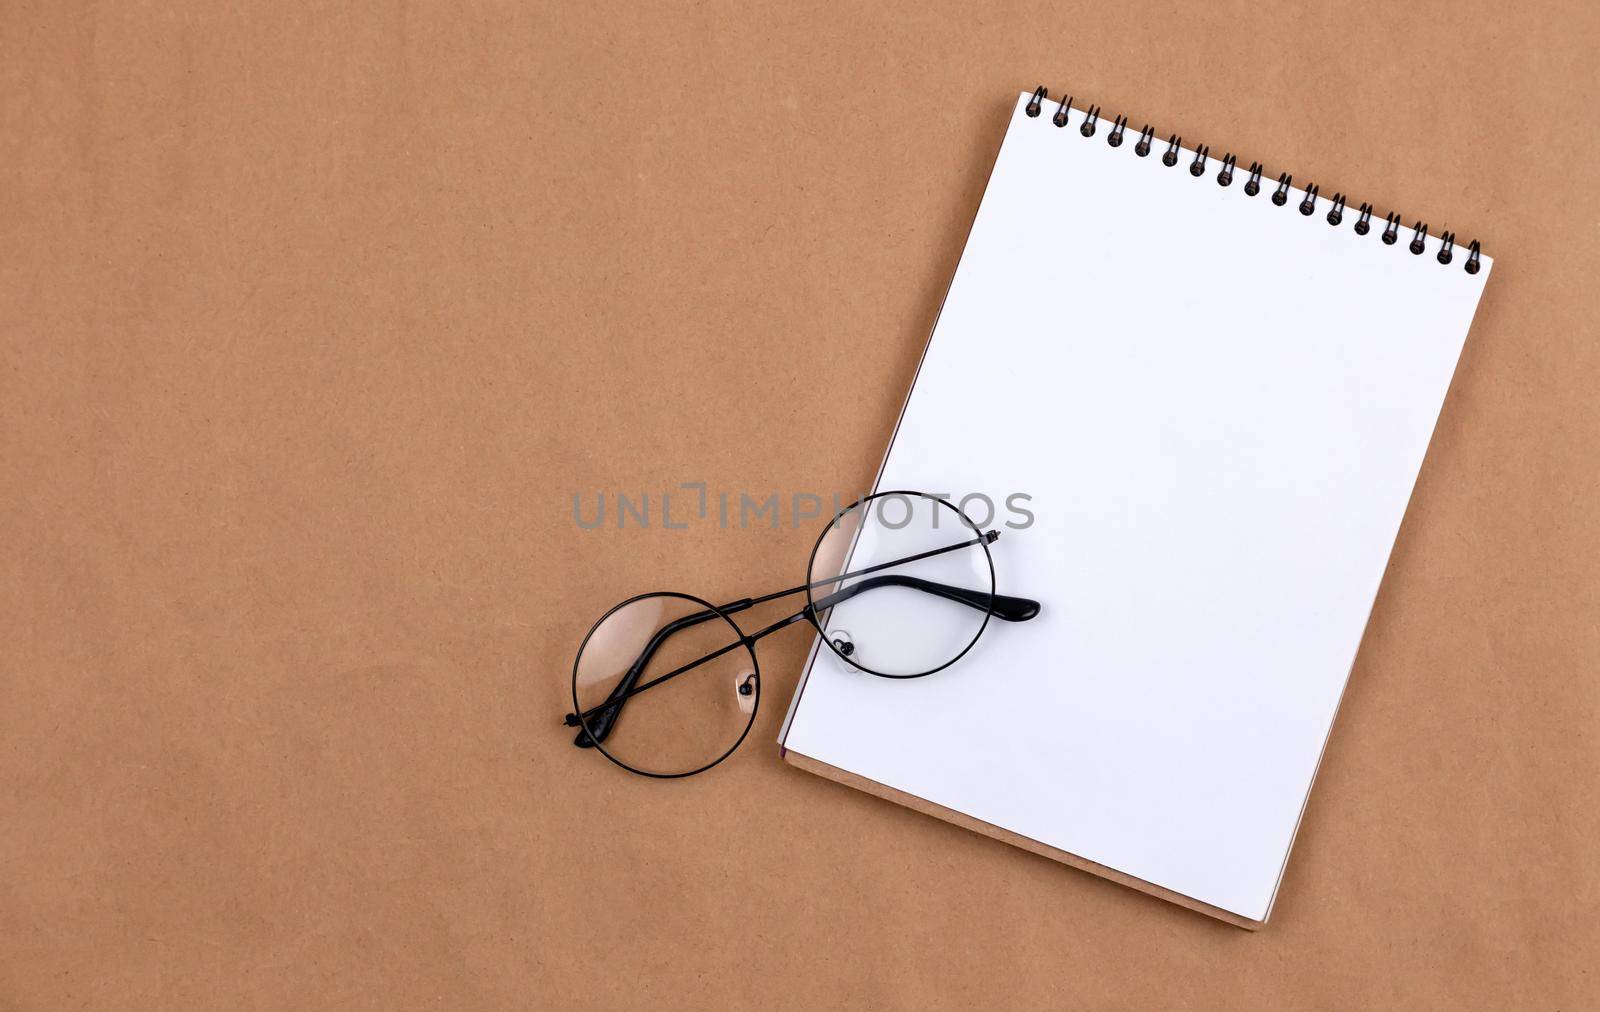 Stationary concept, Flat Lay top view Photo of glasses and notepad on a beige abstract background with copy space, minimal style